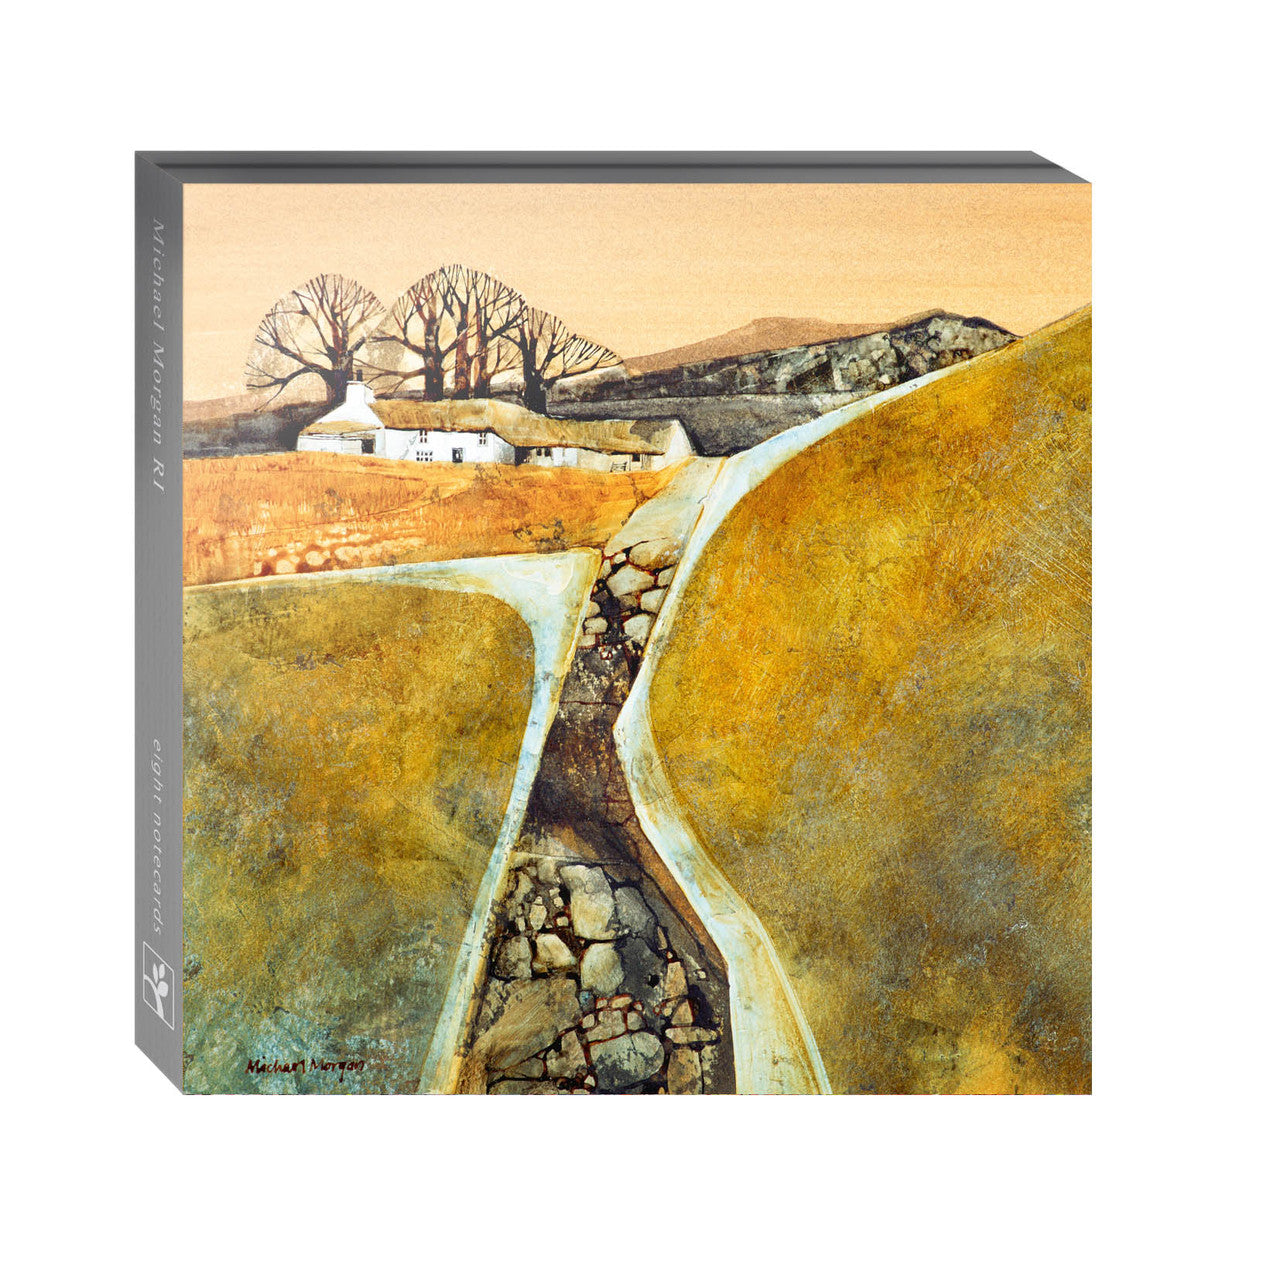 Blank multipack of greeting cards with artwork by Michael Morgan